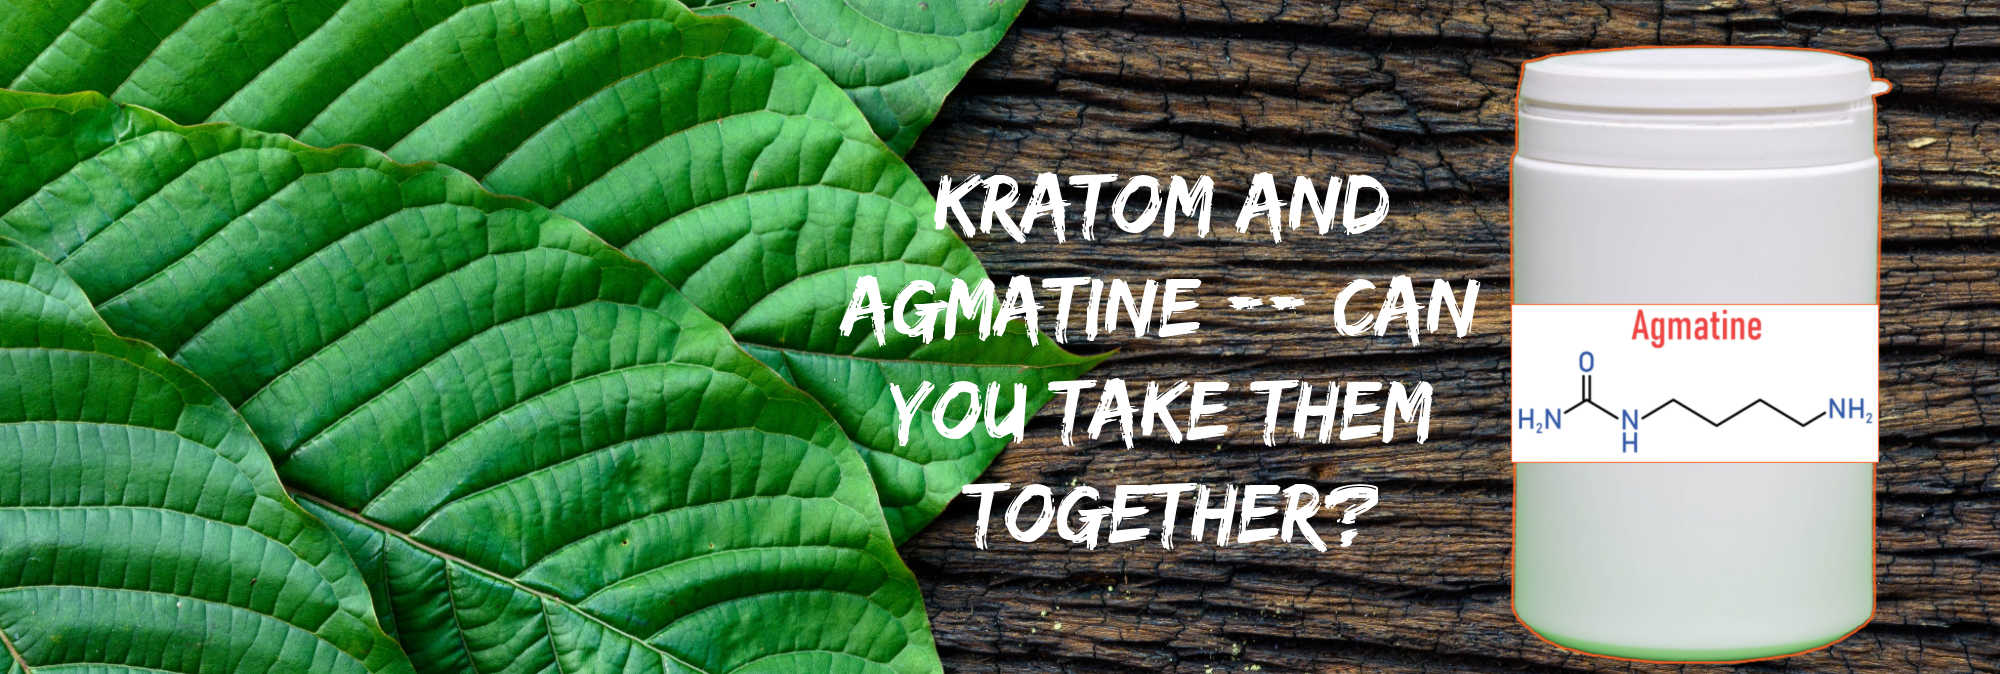 Agmatine and Kratom: Is it a Good Idea to Combine?